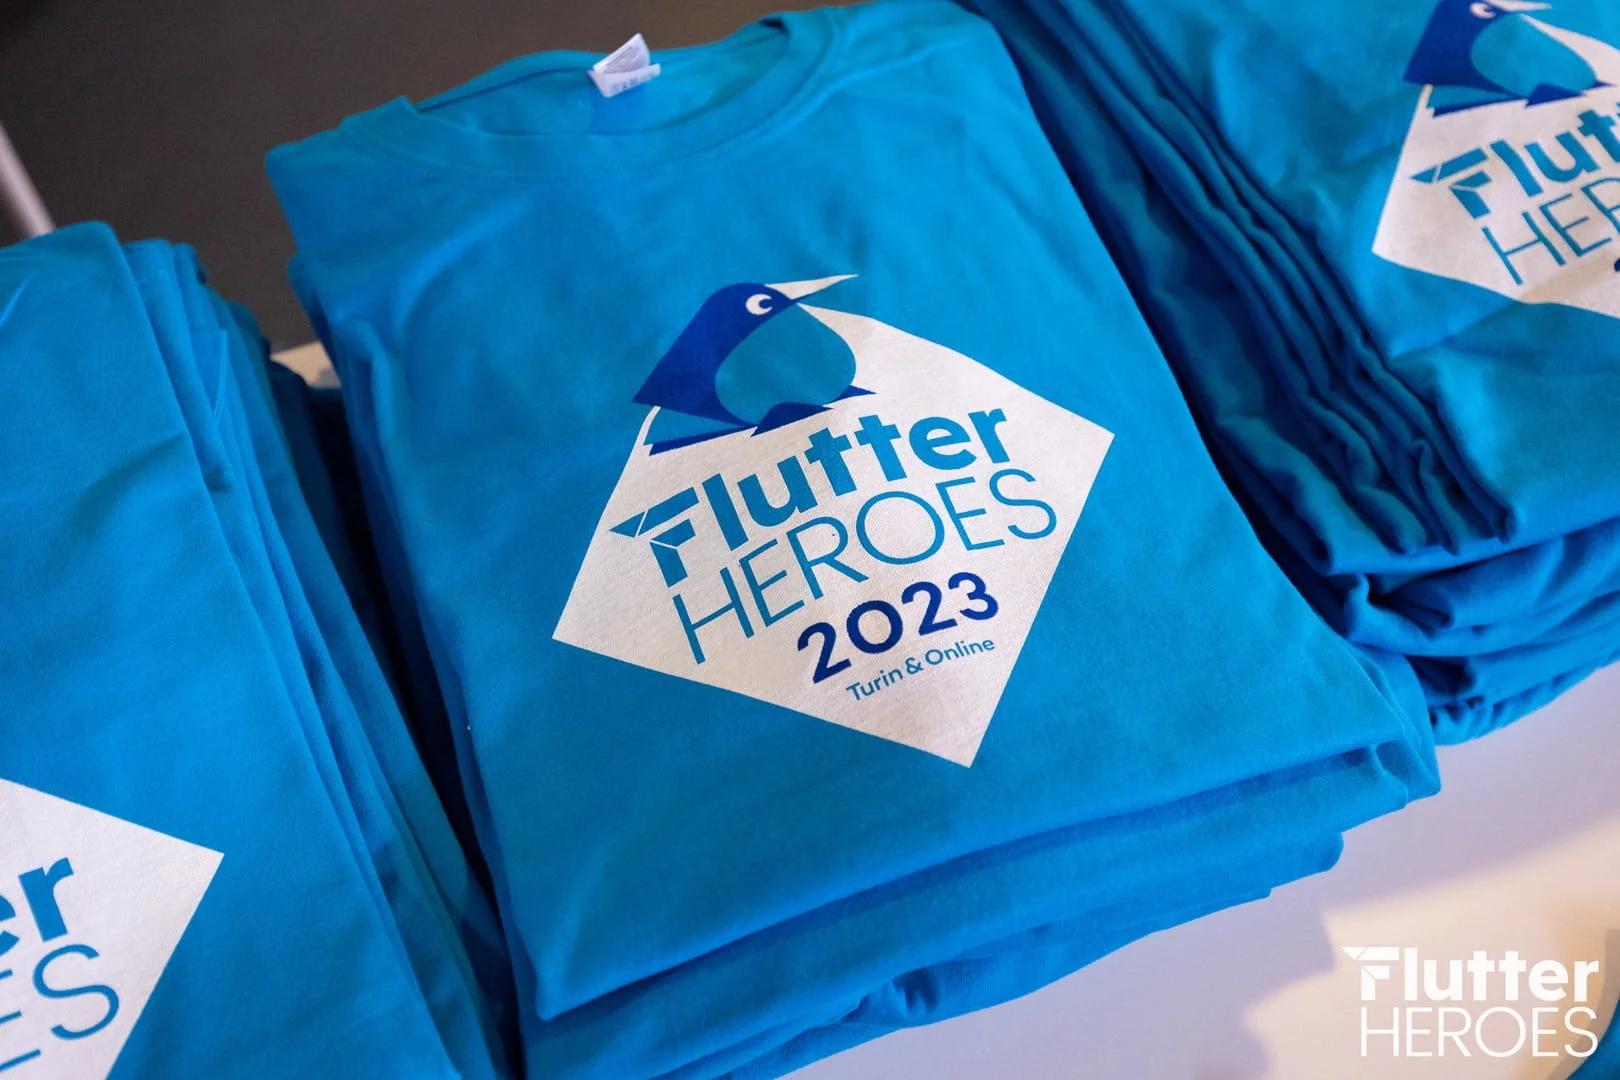 Several stacks of blue printed t-shirts, flutter heroes 2023